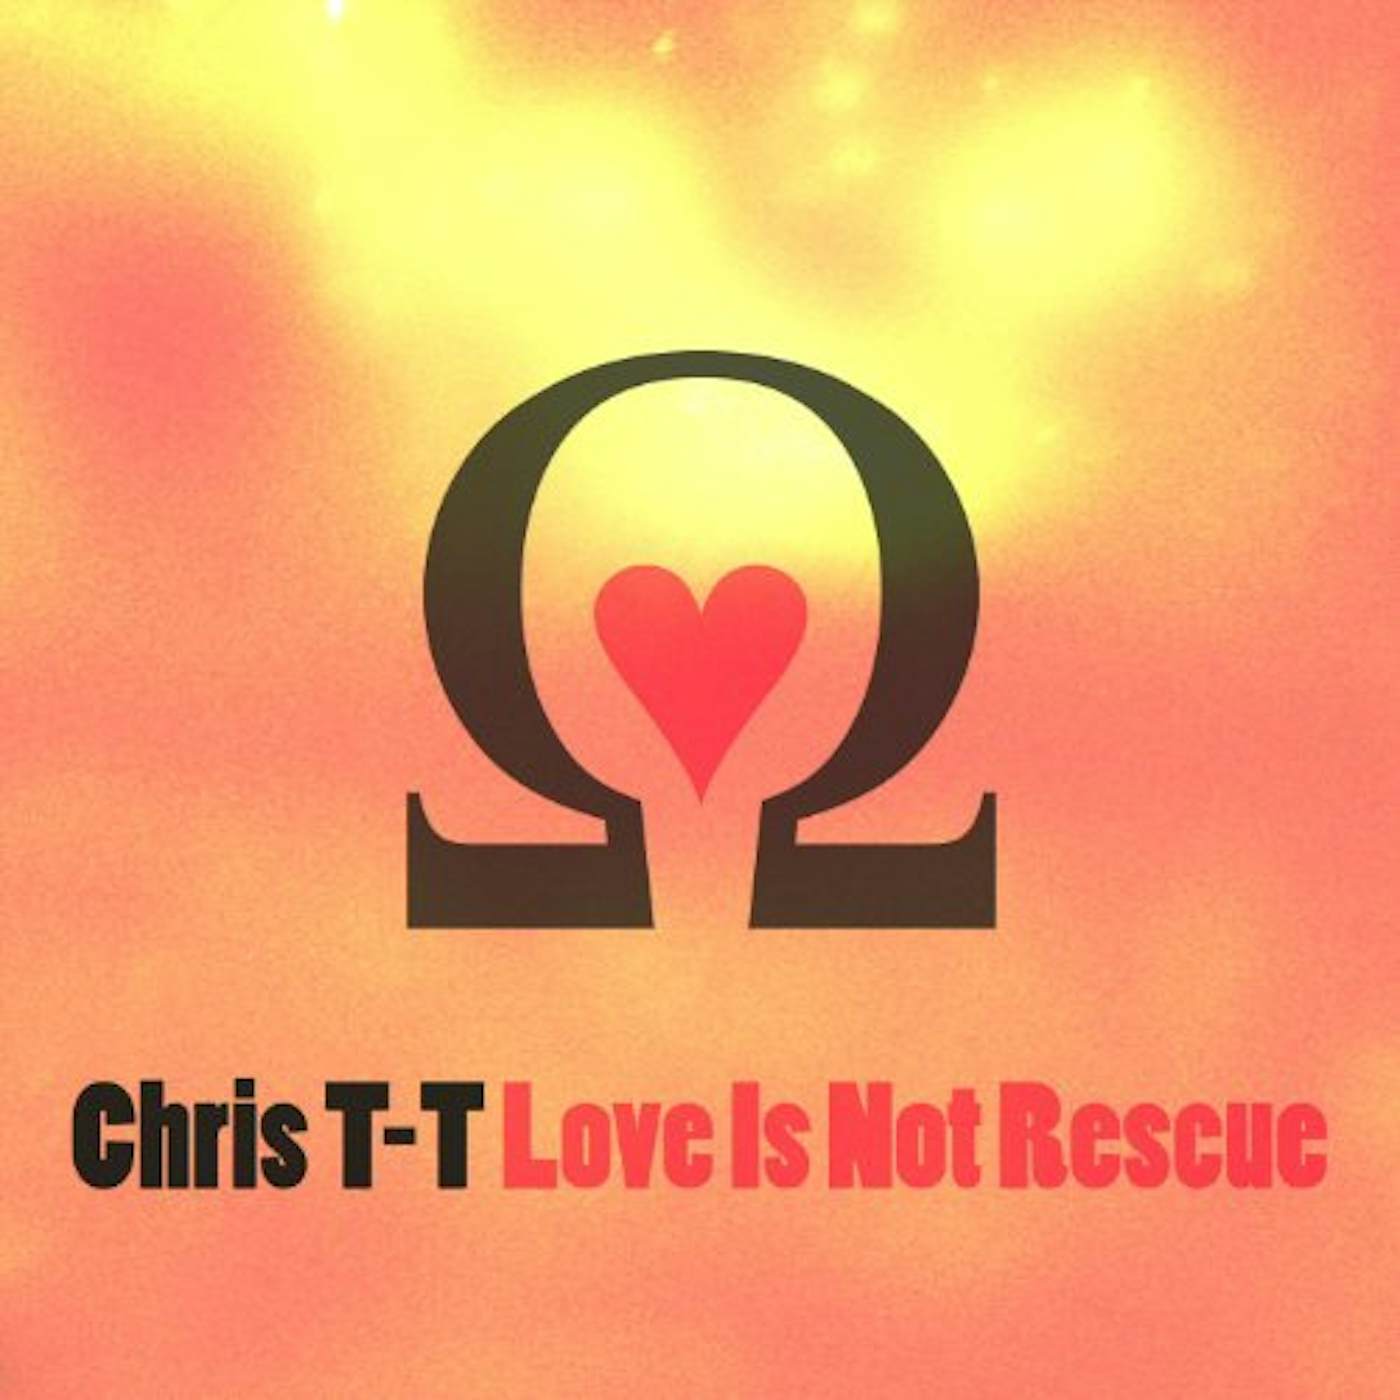 Chris T-T LOVE IS NOT RESCUE CD